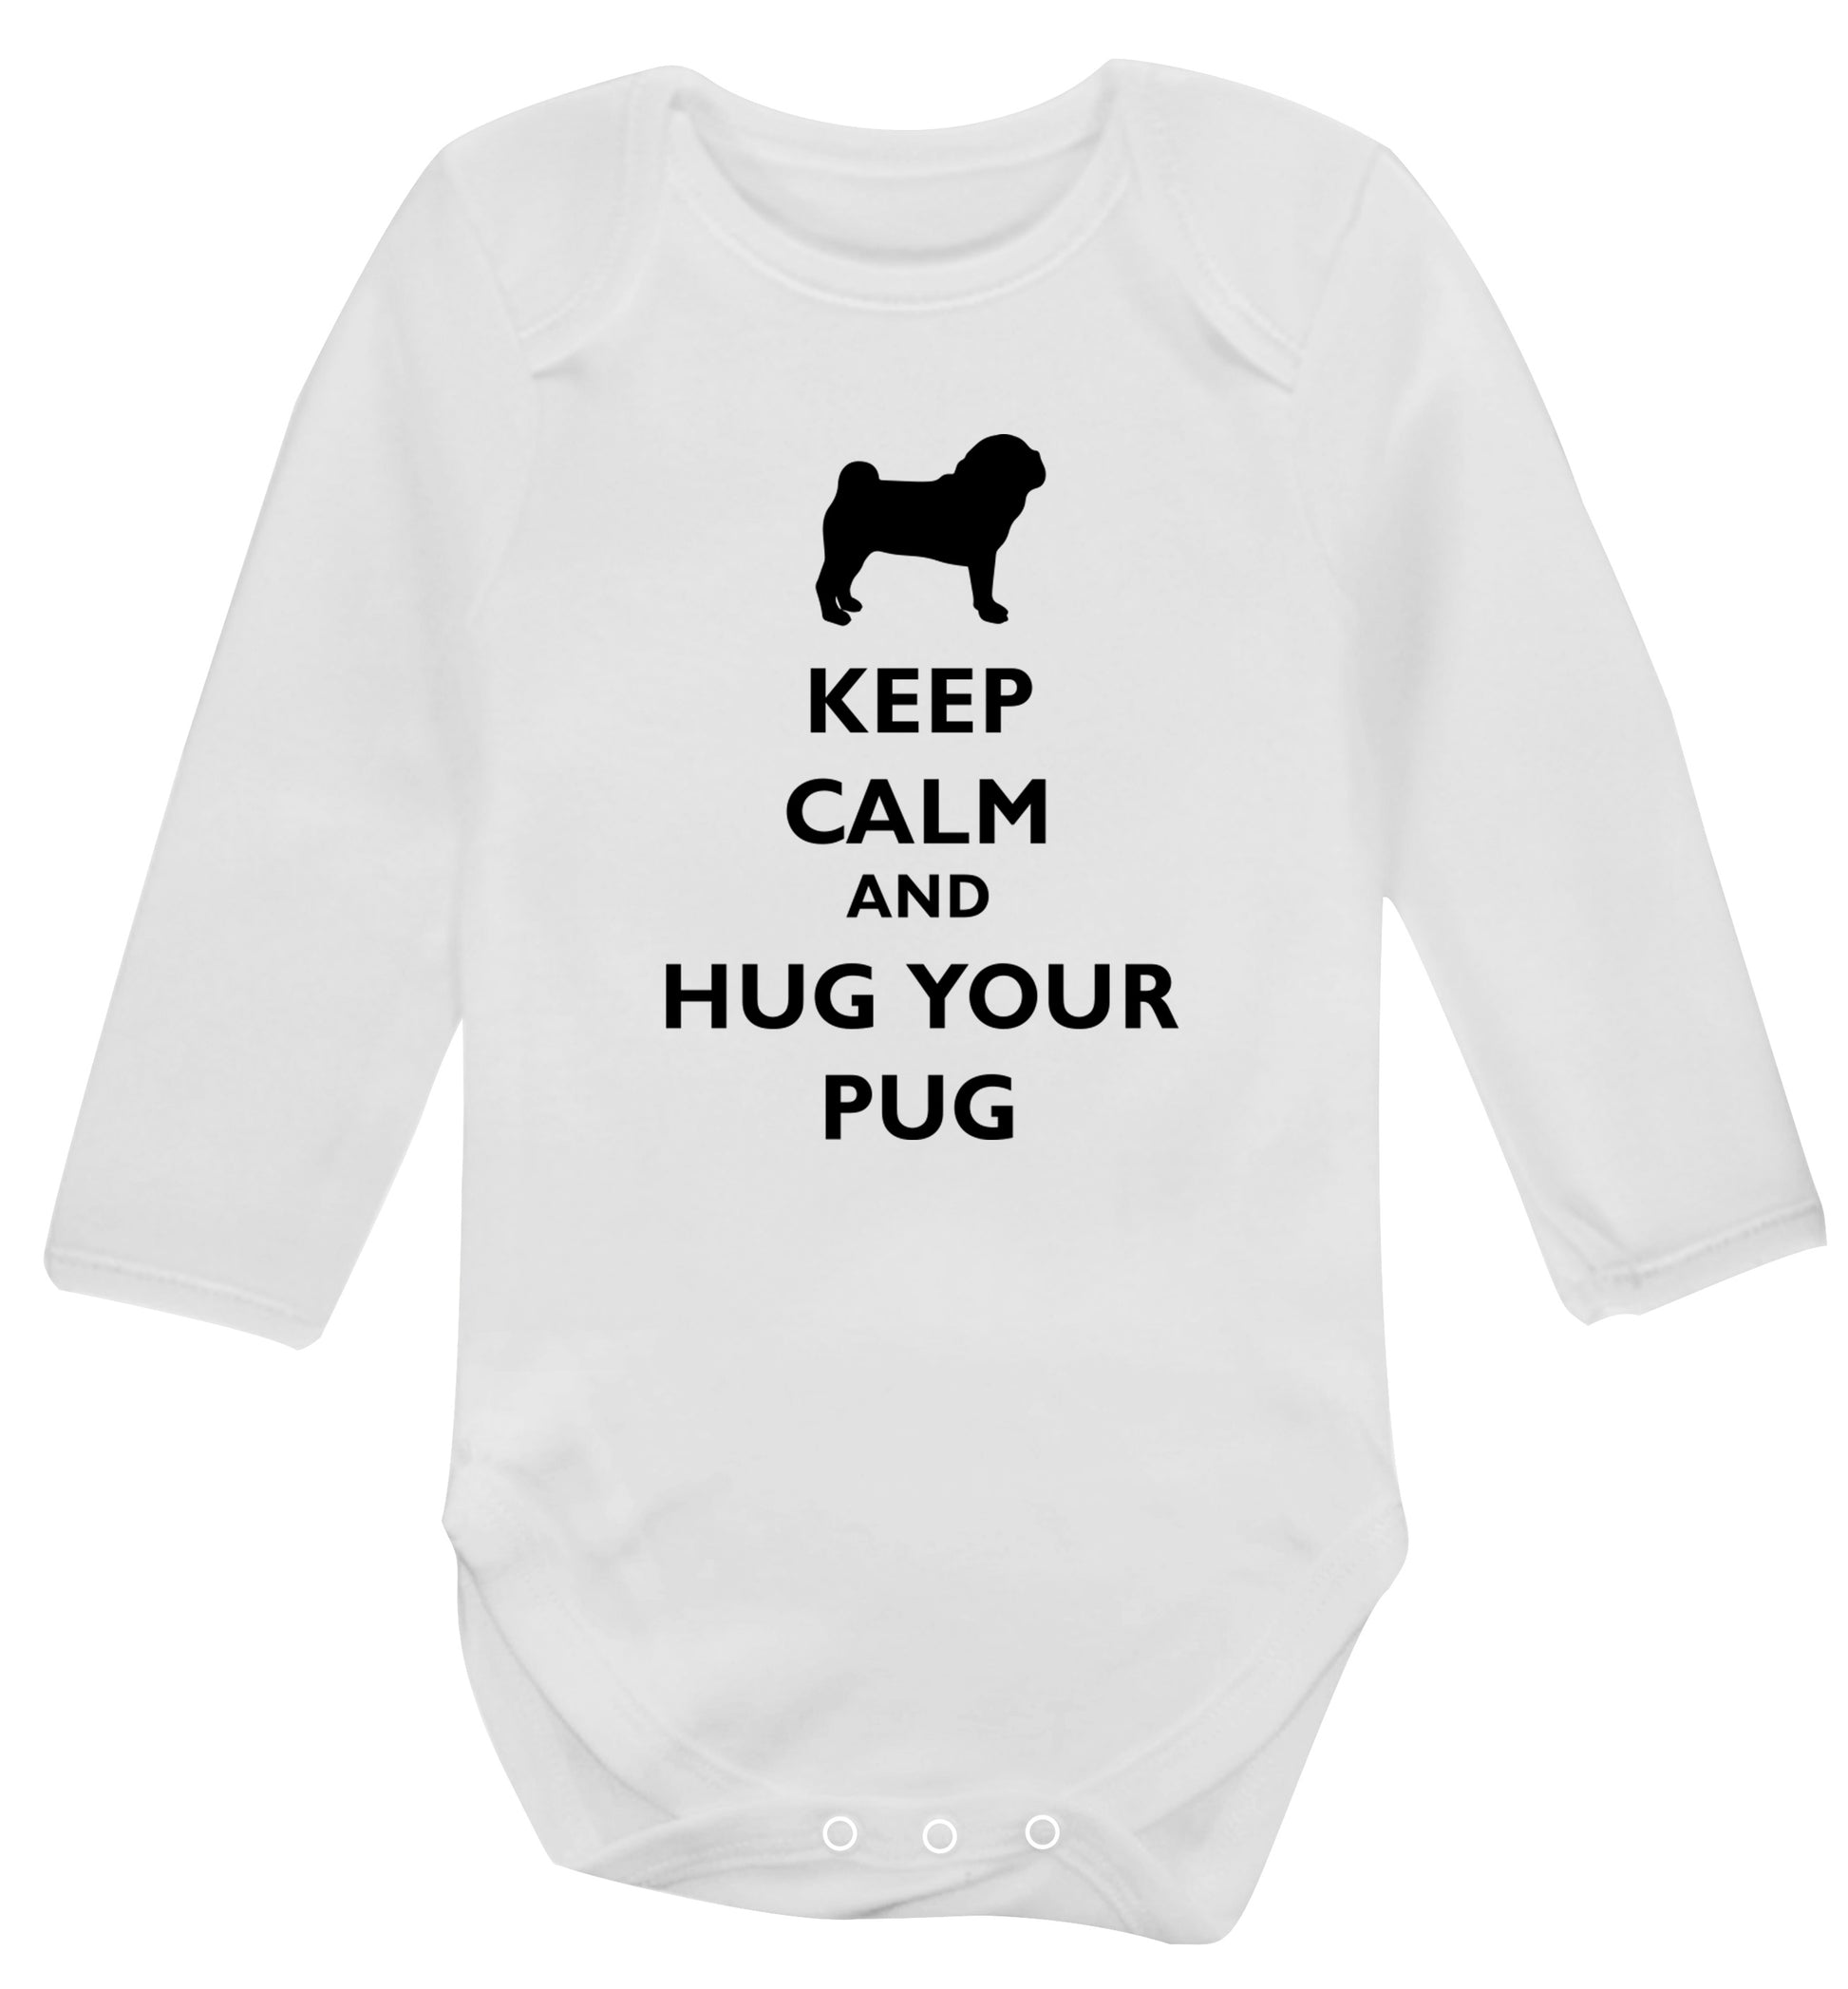 Keep calm and hug your pug Baby Vest long sleeved white 6-12 months